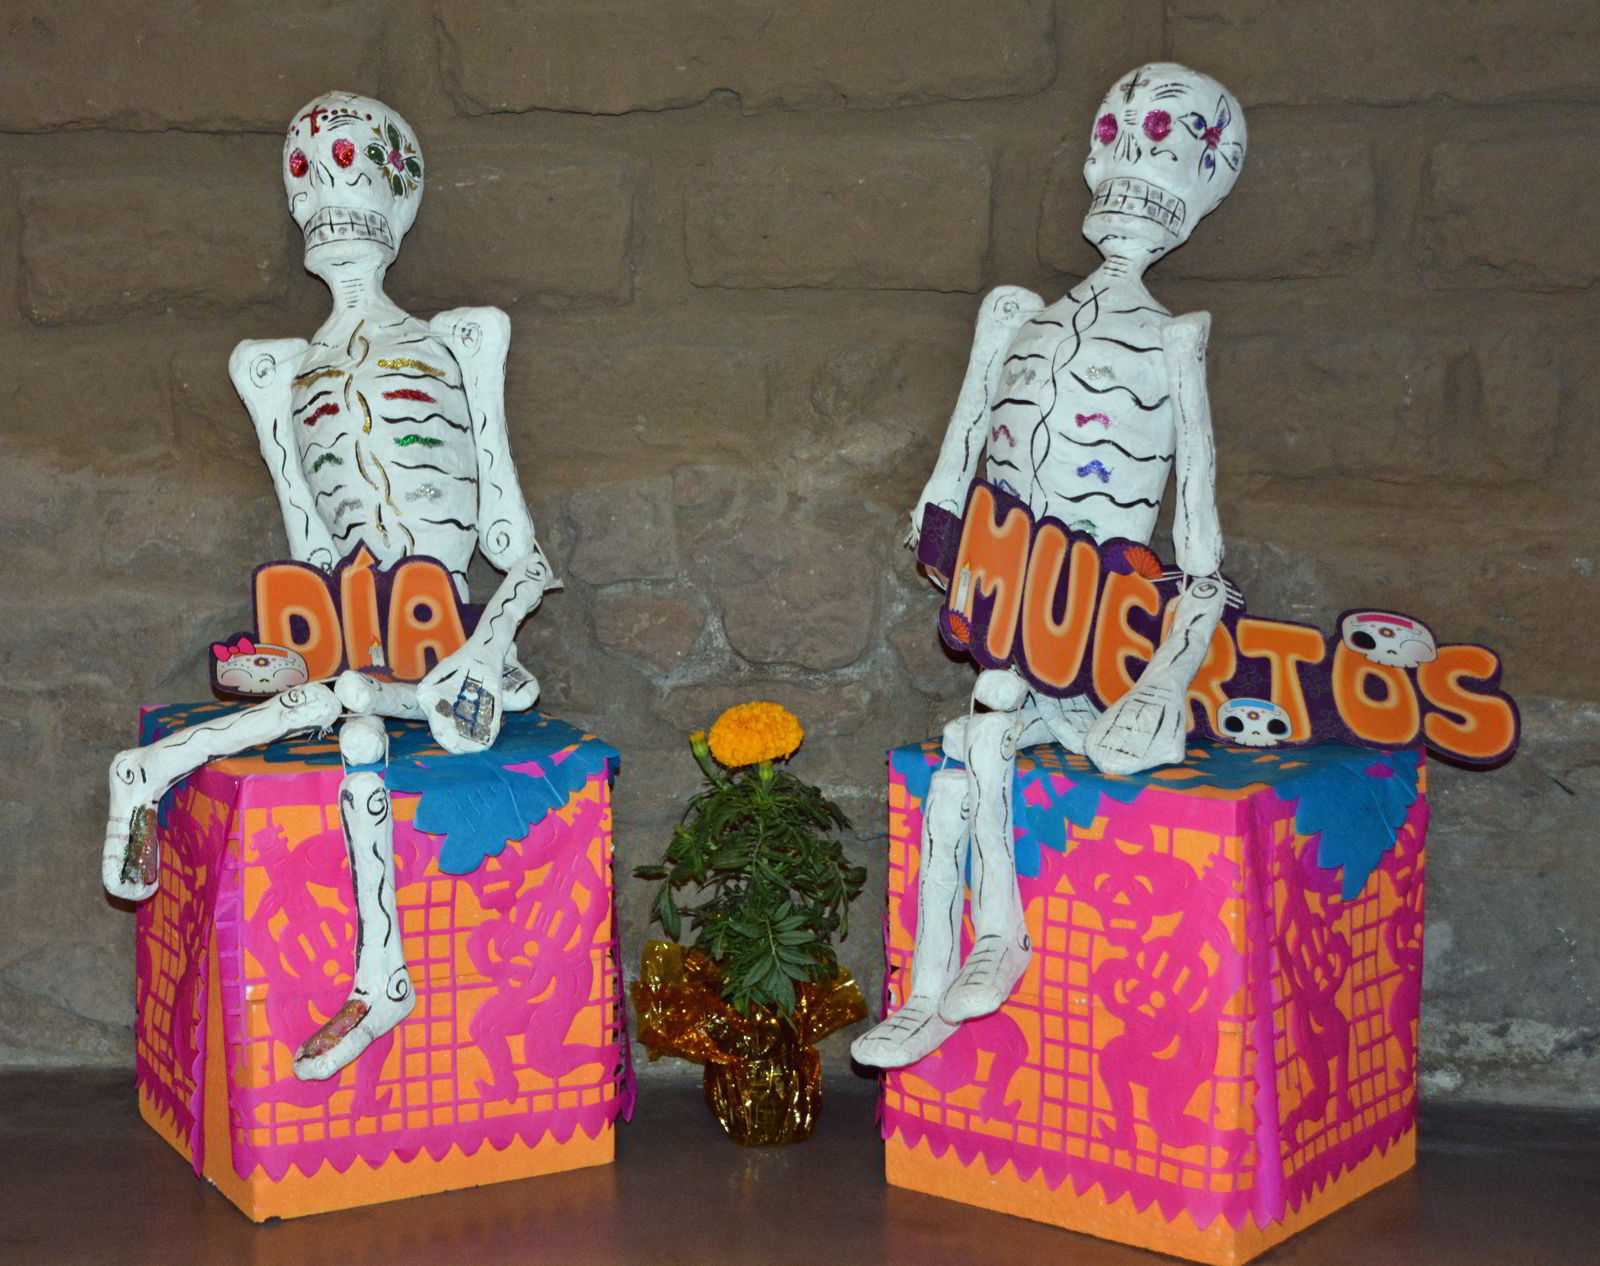 An image of two skeletons in a Day of the Dead display - Day of the Dead Festival- Día de Muertos